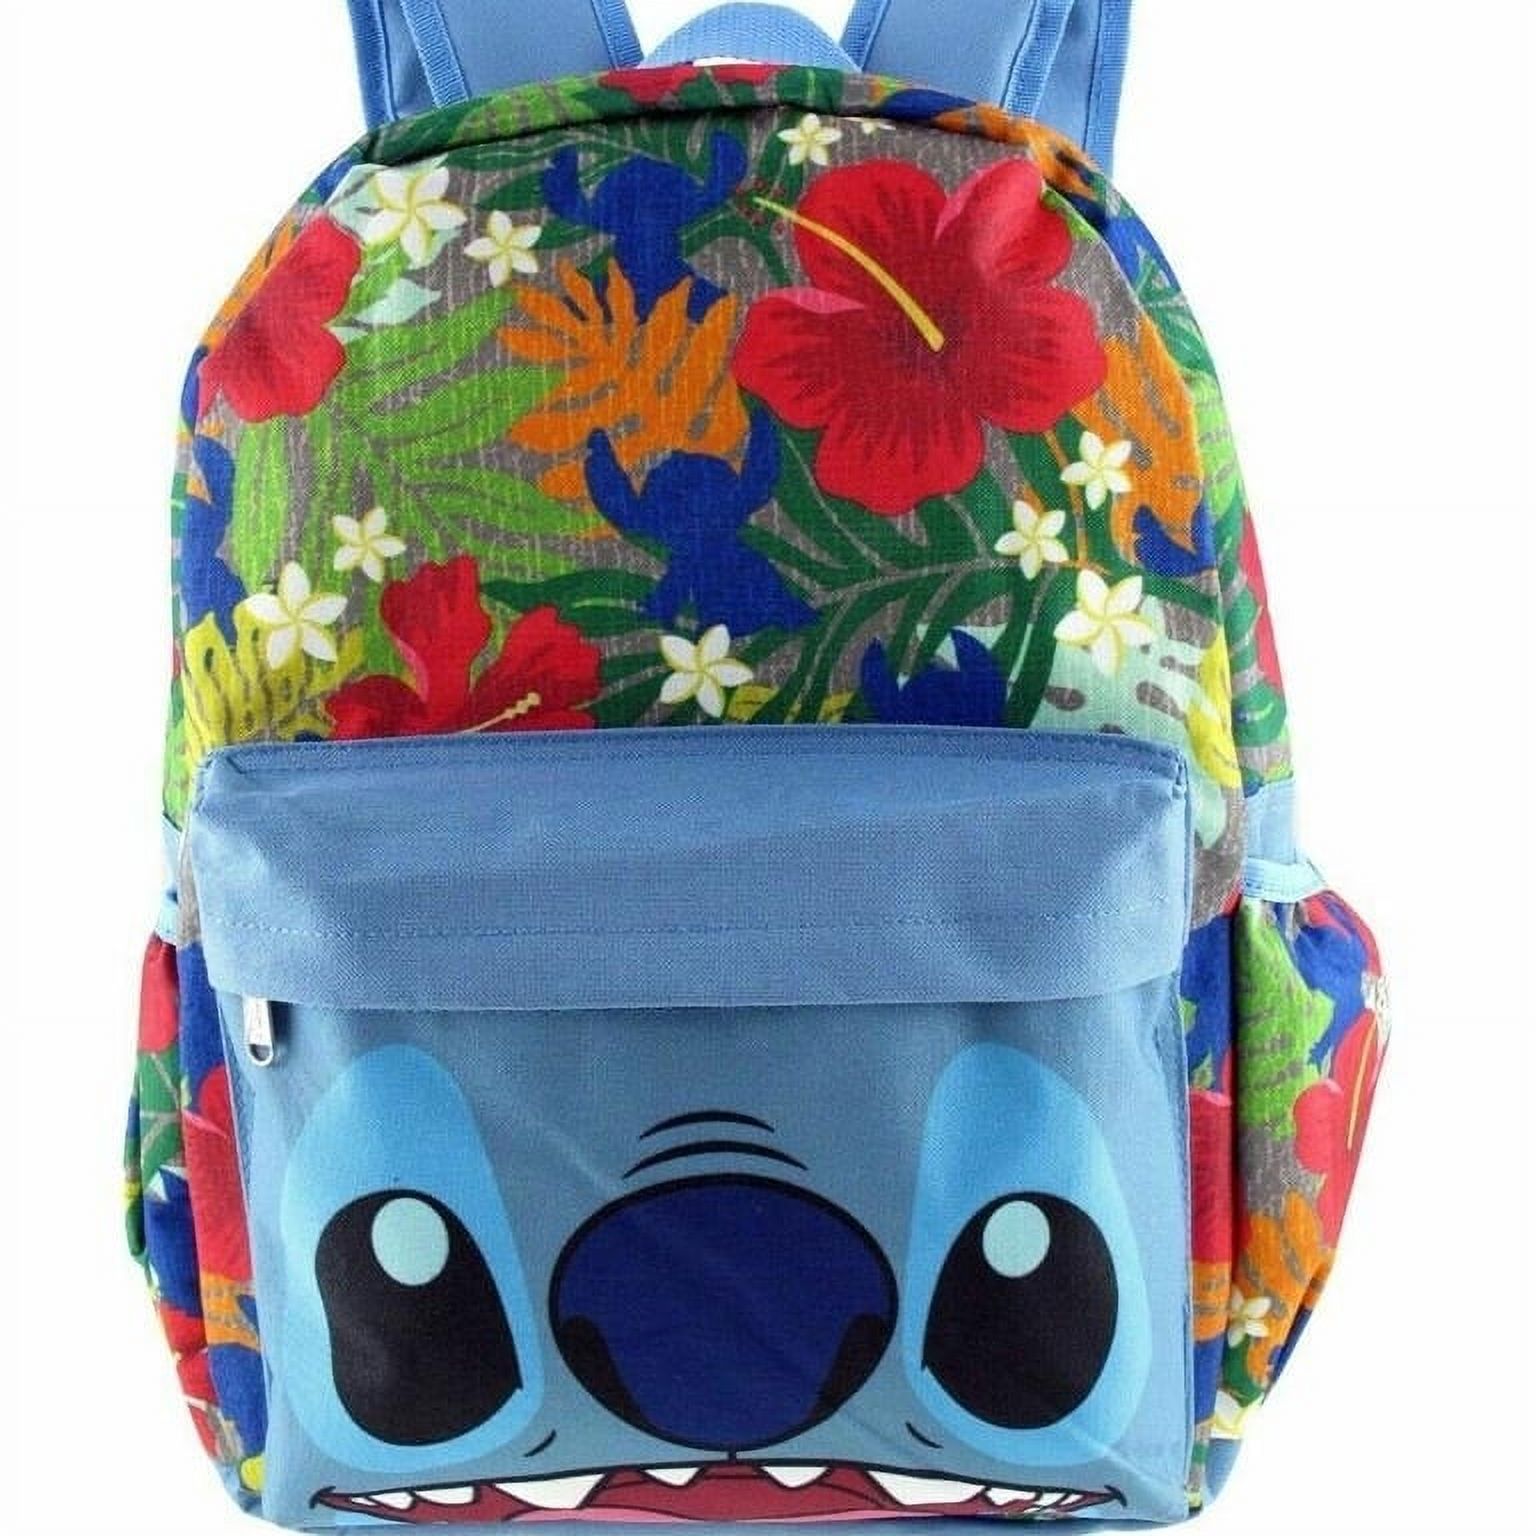 Disney Lilo and Stitch Backpack 16" Canvas Big Face Large All over Print - New with box/tags - image 1 of 2